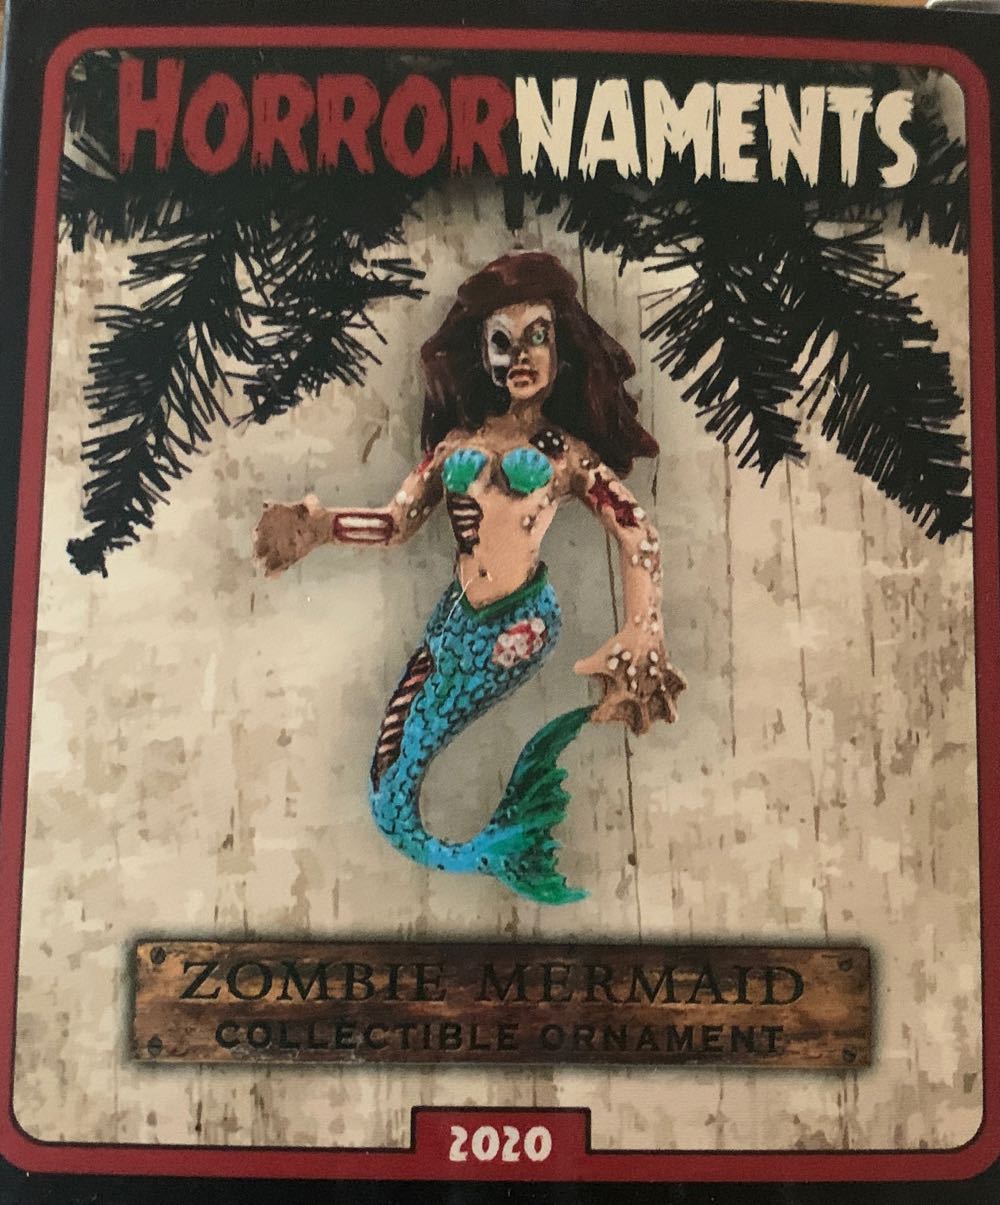 Horrornaments Zombie Mermaid - Horrornaments ornament collectible [Barcode 854565006997] - Main Image 1